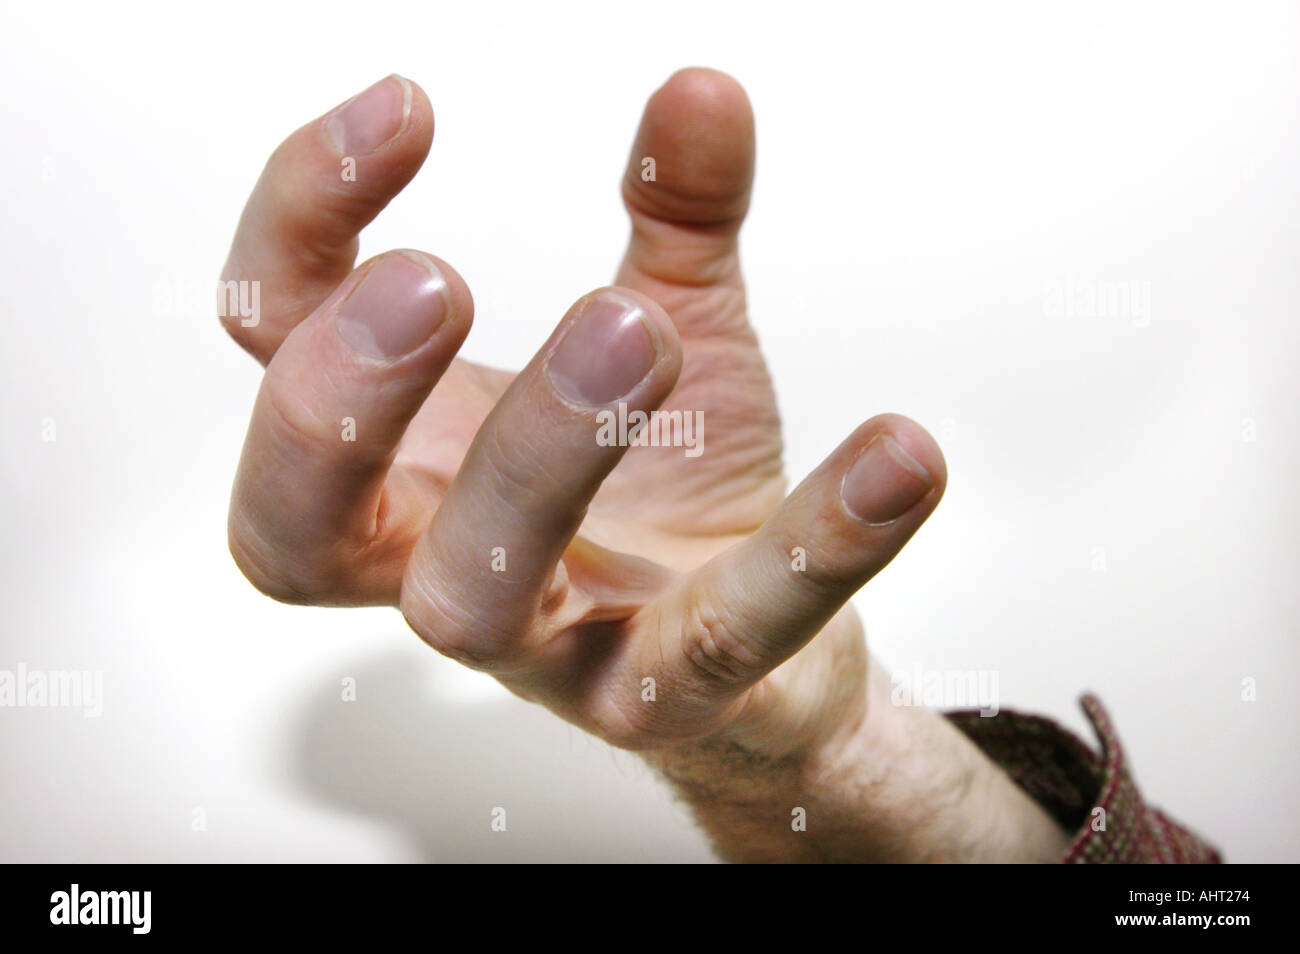 gesturing hand SQUEEZE STRANGLE GRIPP OPEN HAND HOLD GET Stock Photo